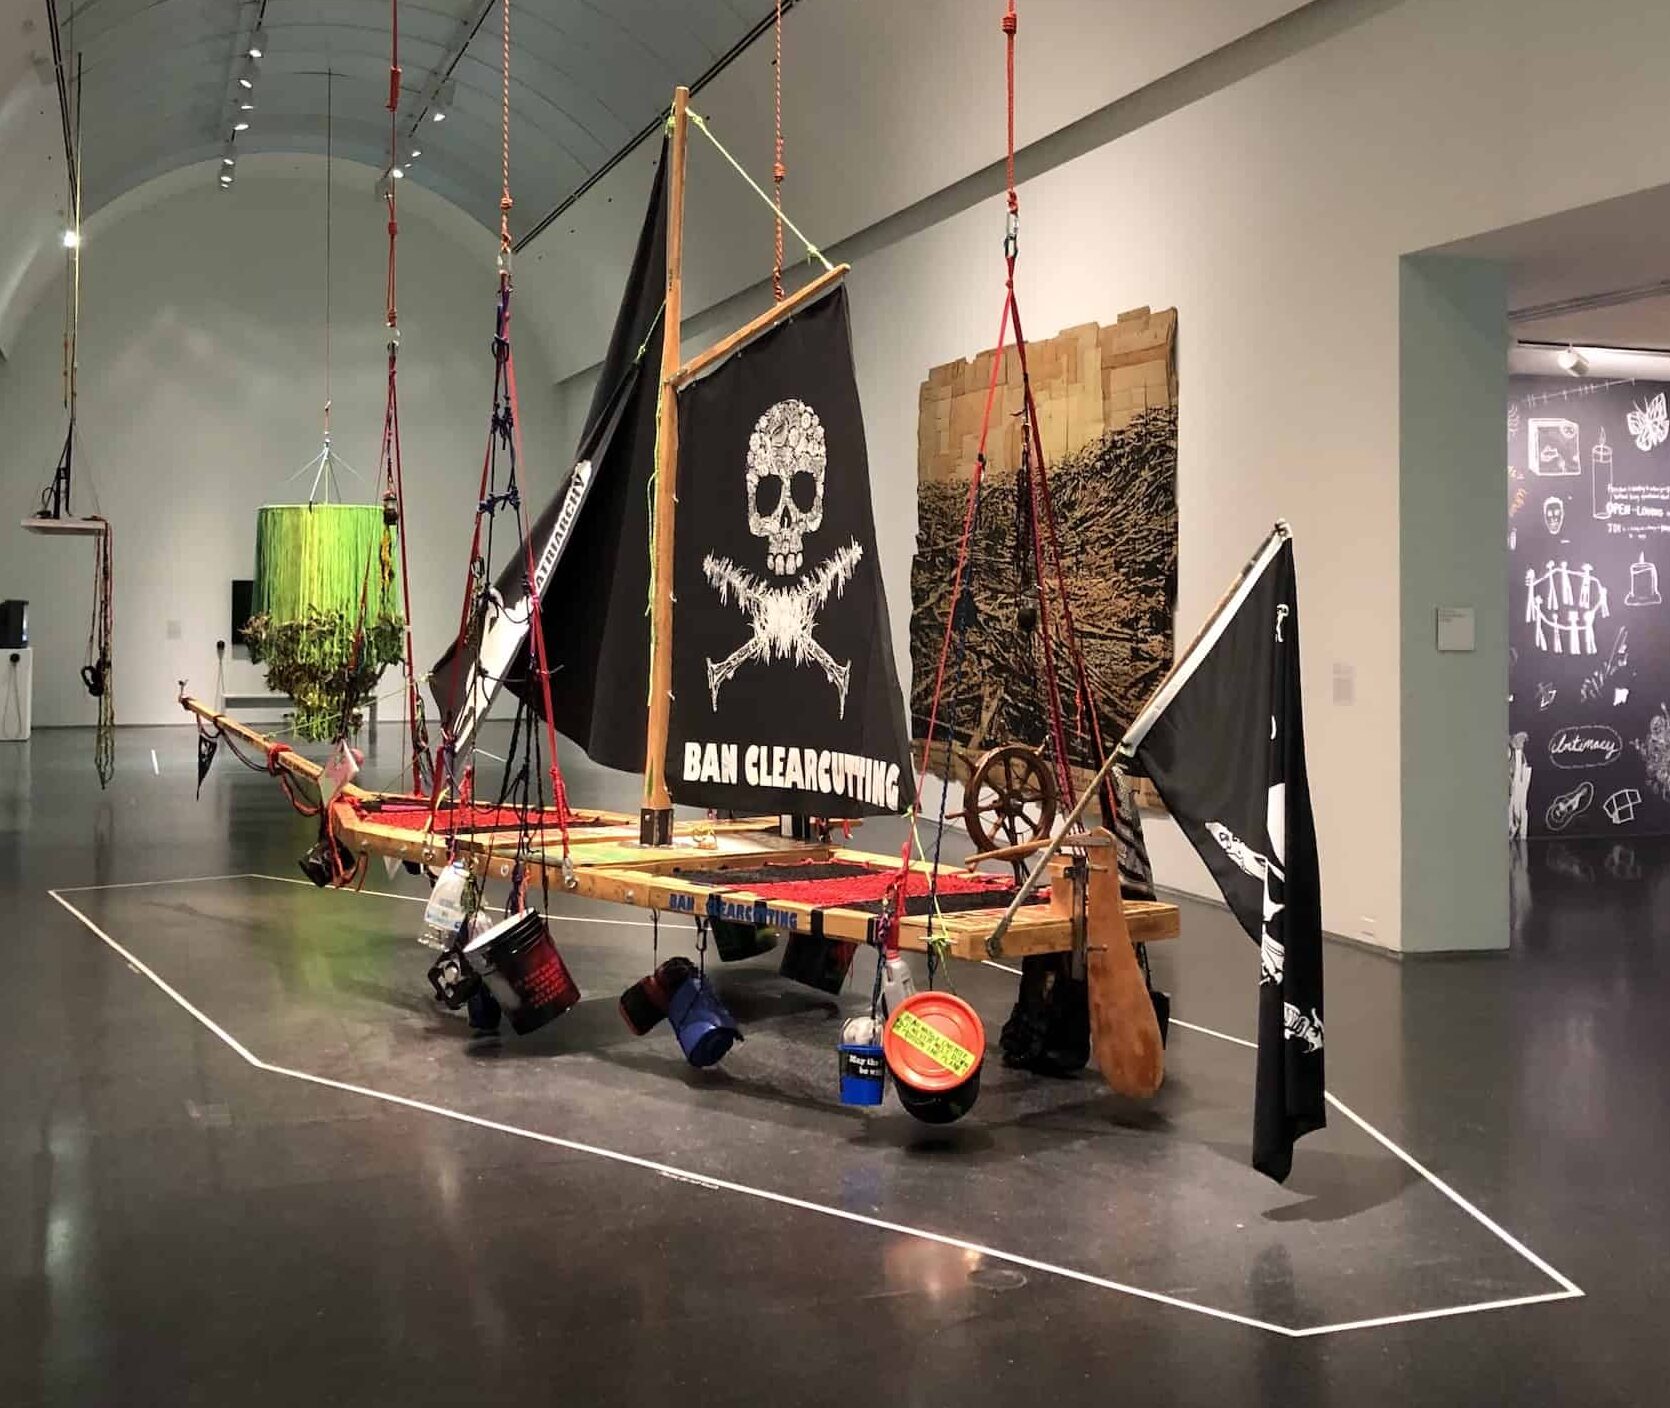 Radical Feminist Pirate Ship Tree Sitting Platform (2013) in the Andrea Bowers exhibition at the Museum of Contemporary Art in Chicago, Illinois